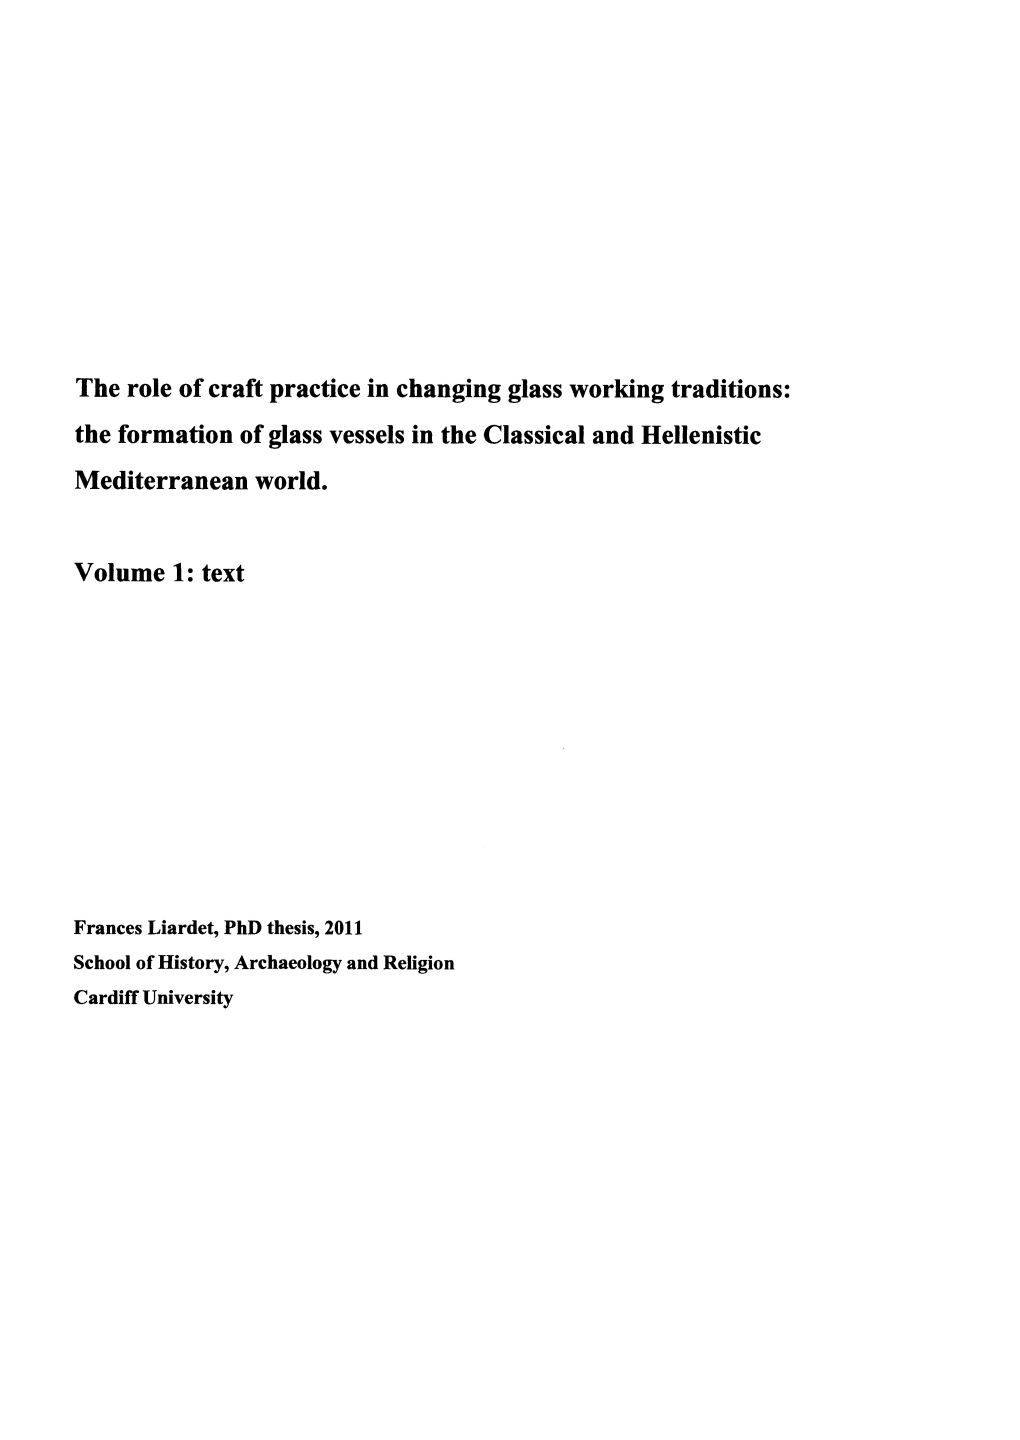 The Formation of Glass Vessels in the Classical and Hellenistic Mediterranean World